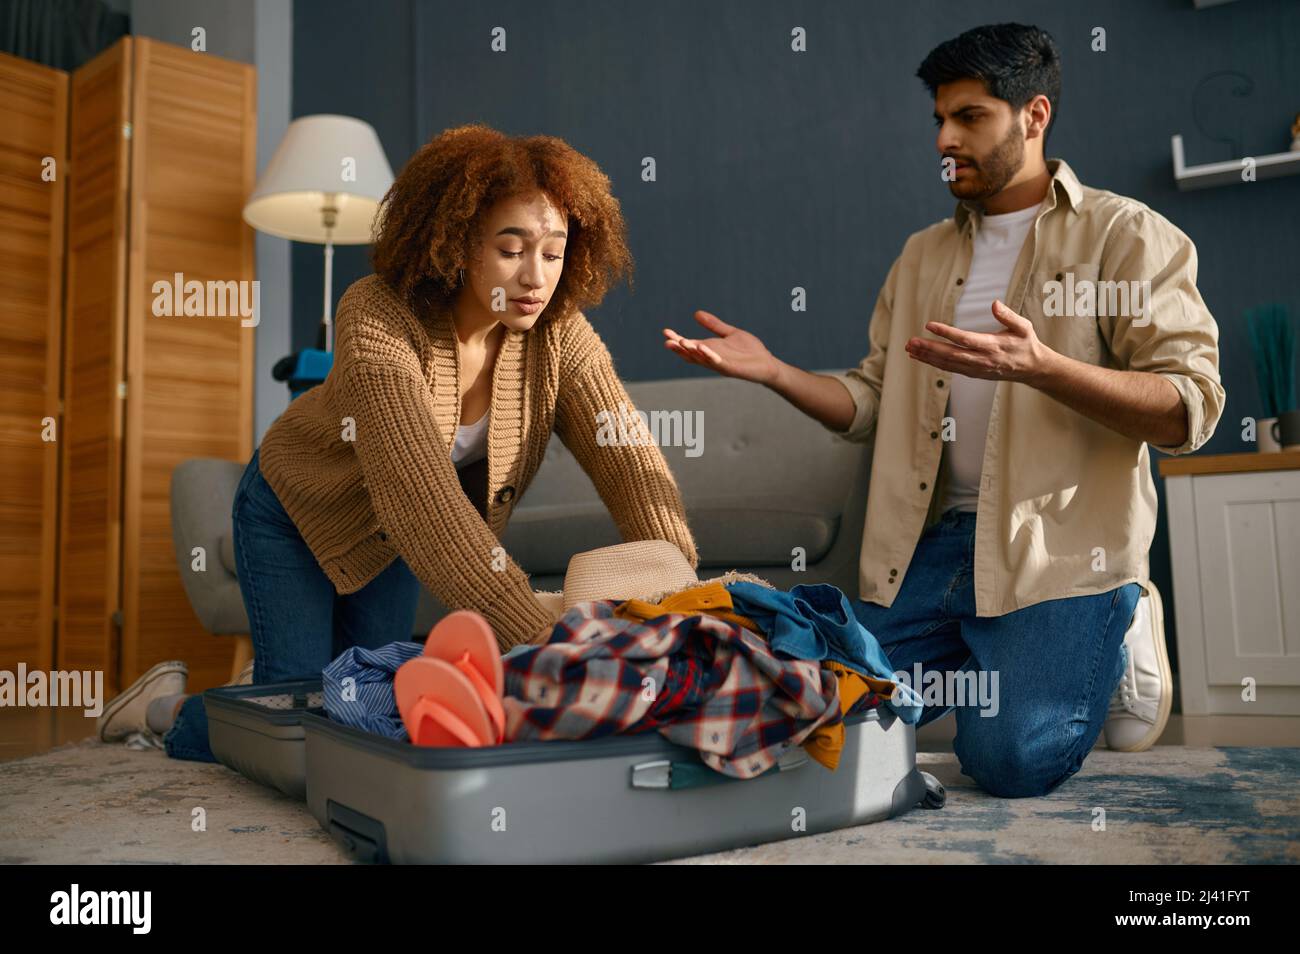 Couple trying to pack belongings into suitcase Stock Photo